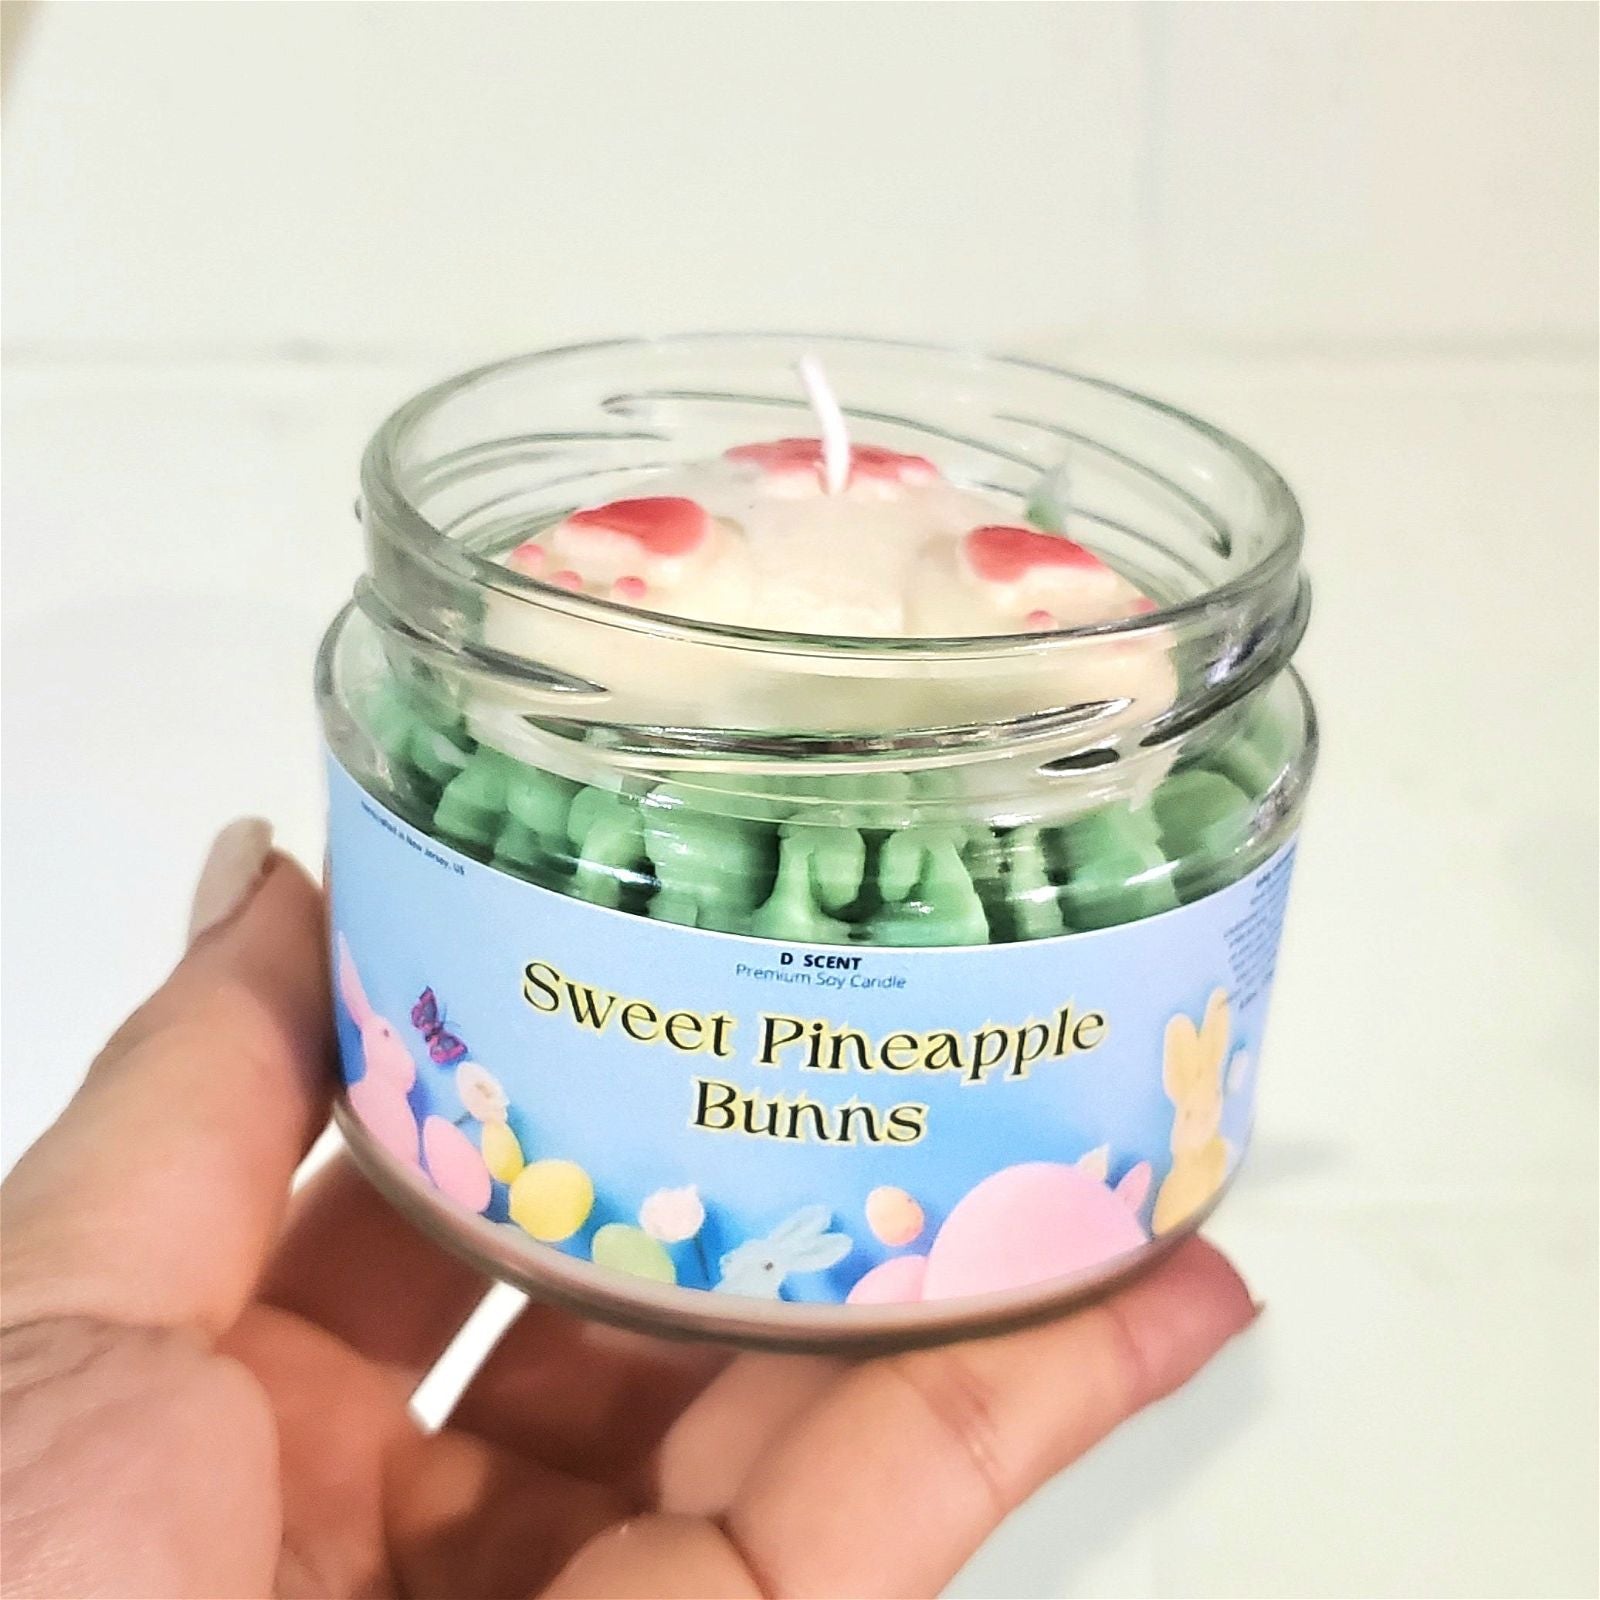 Sweet Pineapple Bunns Soy Candle | Wide Straight-Side Jar - D SCENT 